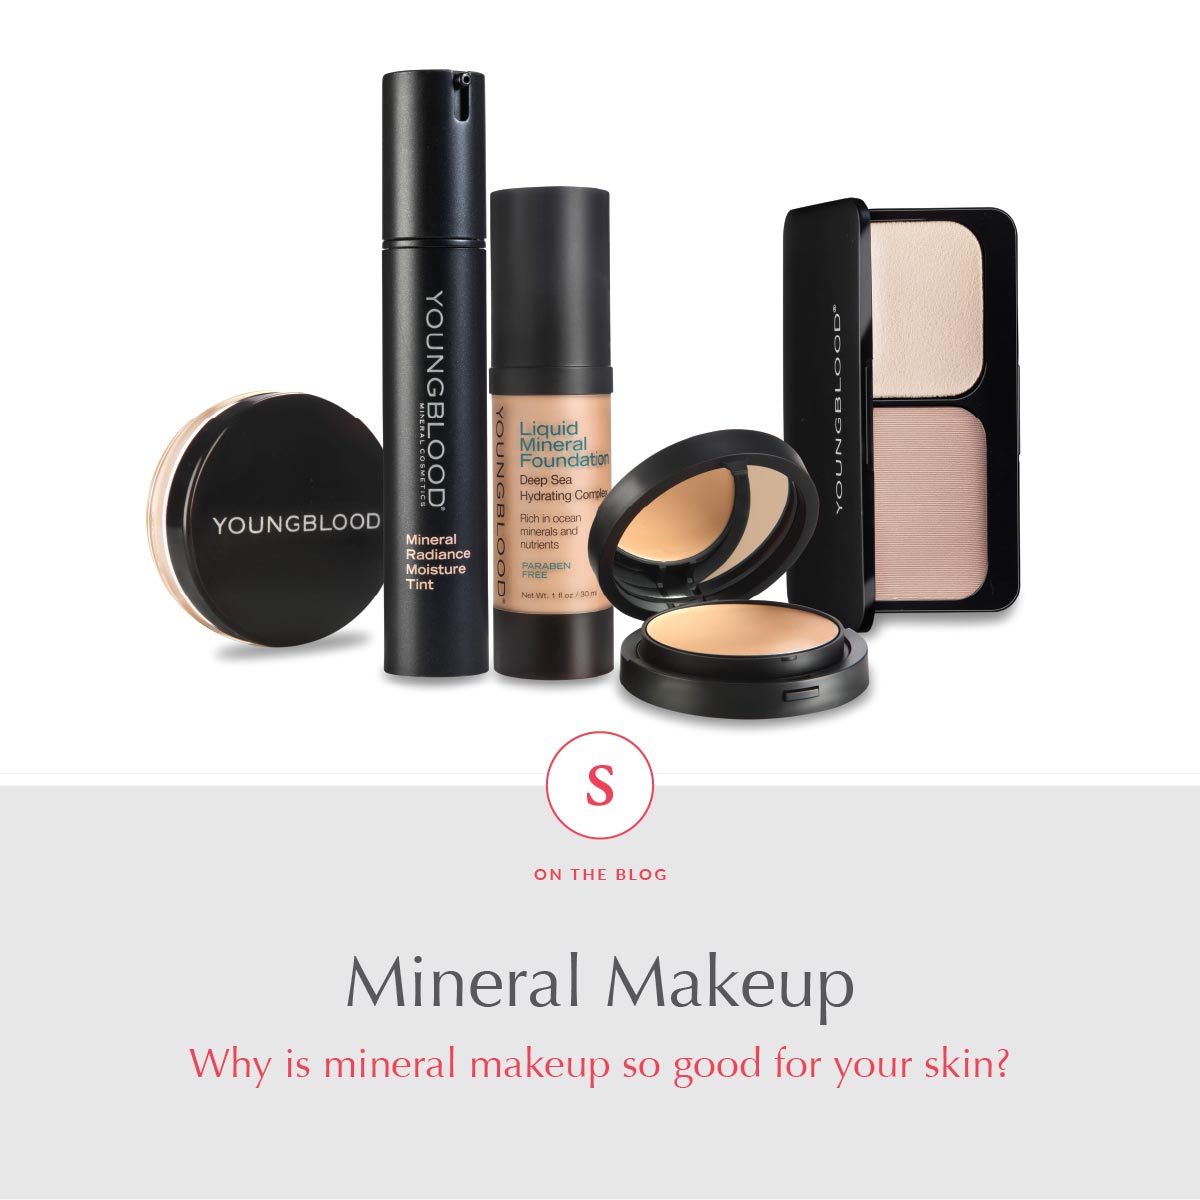 Why is mineral makeup so good for your skin?